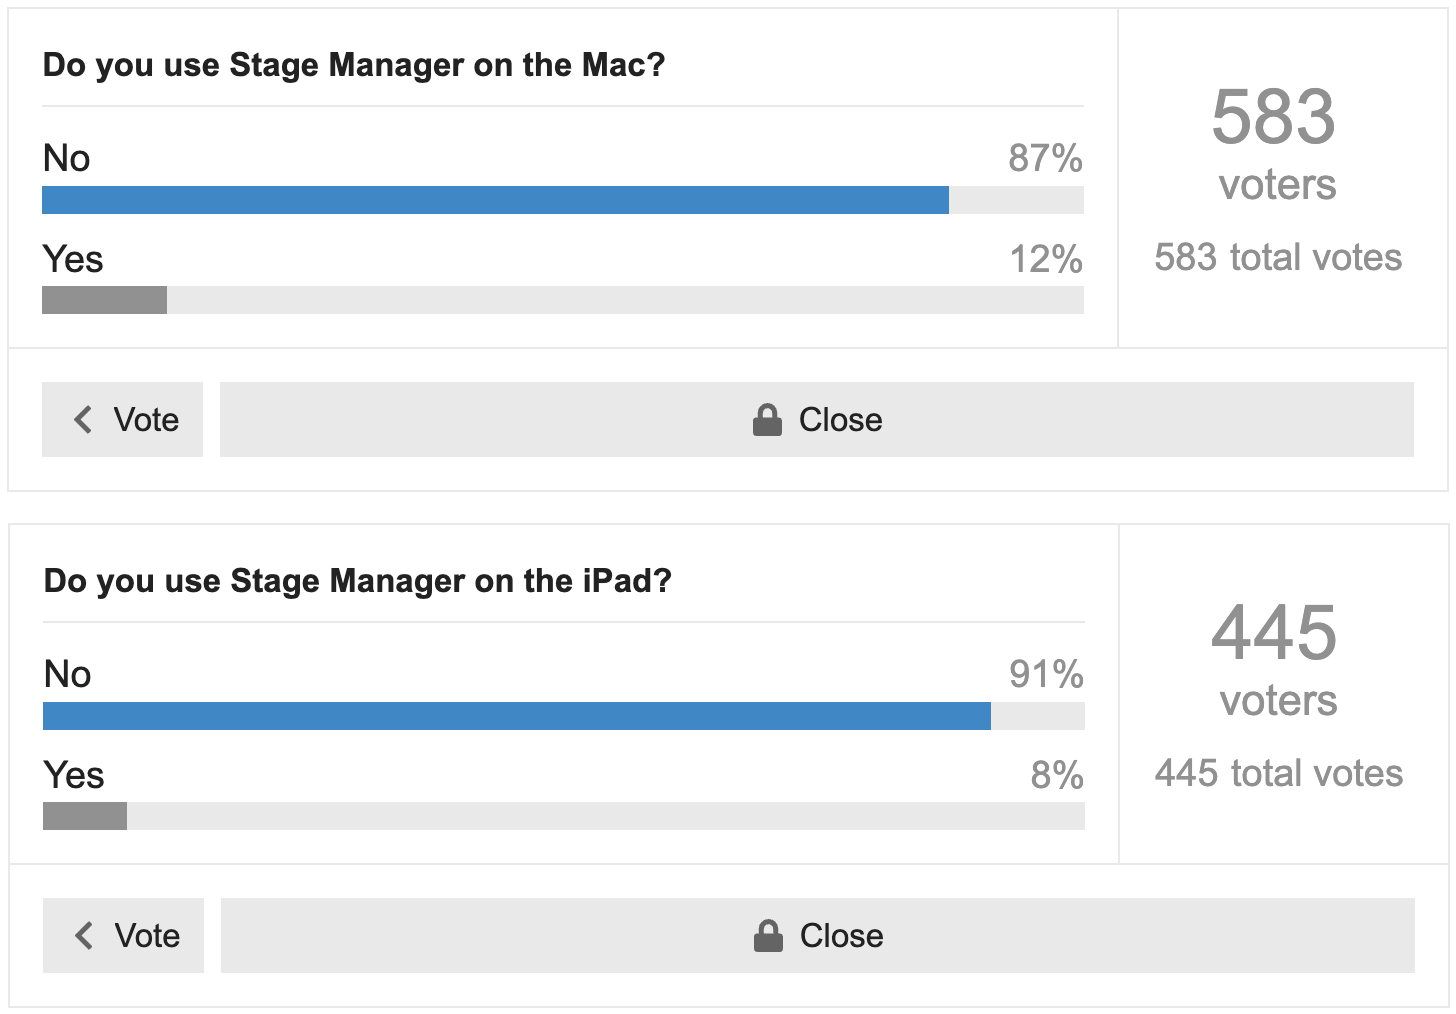 Do You Use It? poll results for Stage Manager